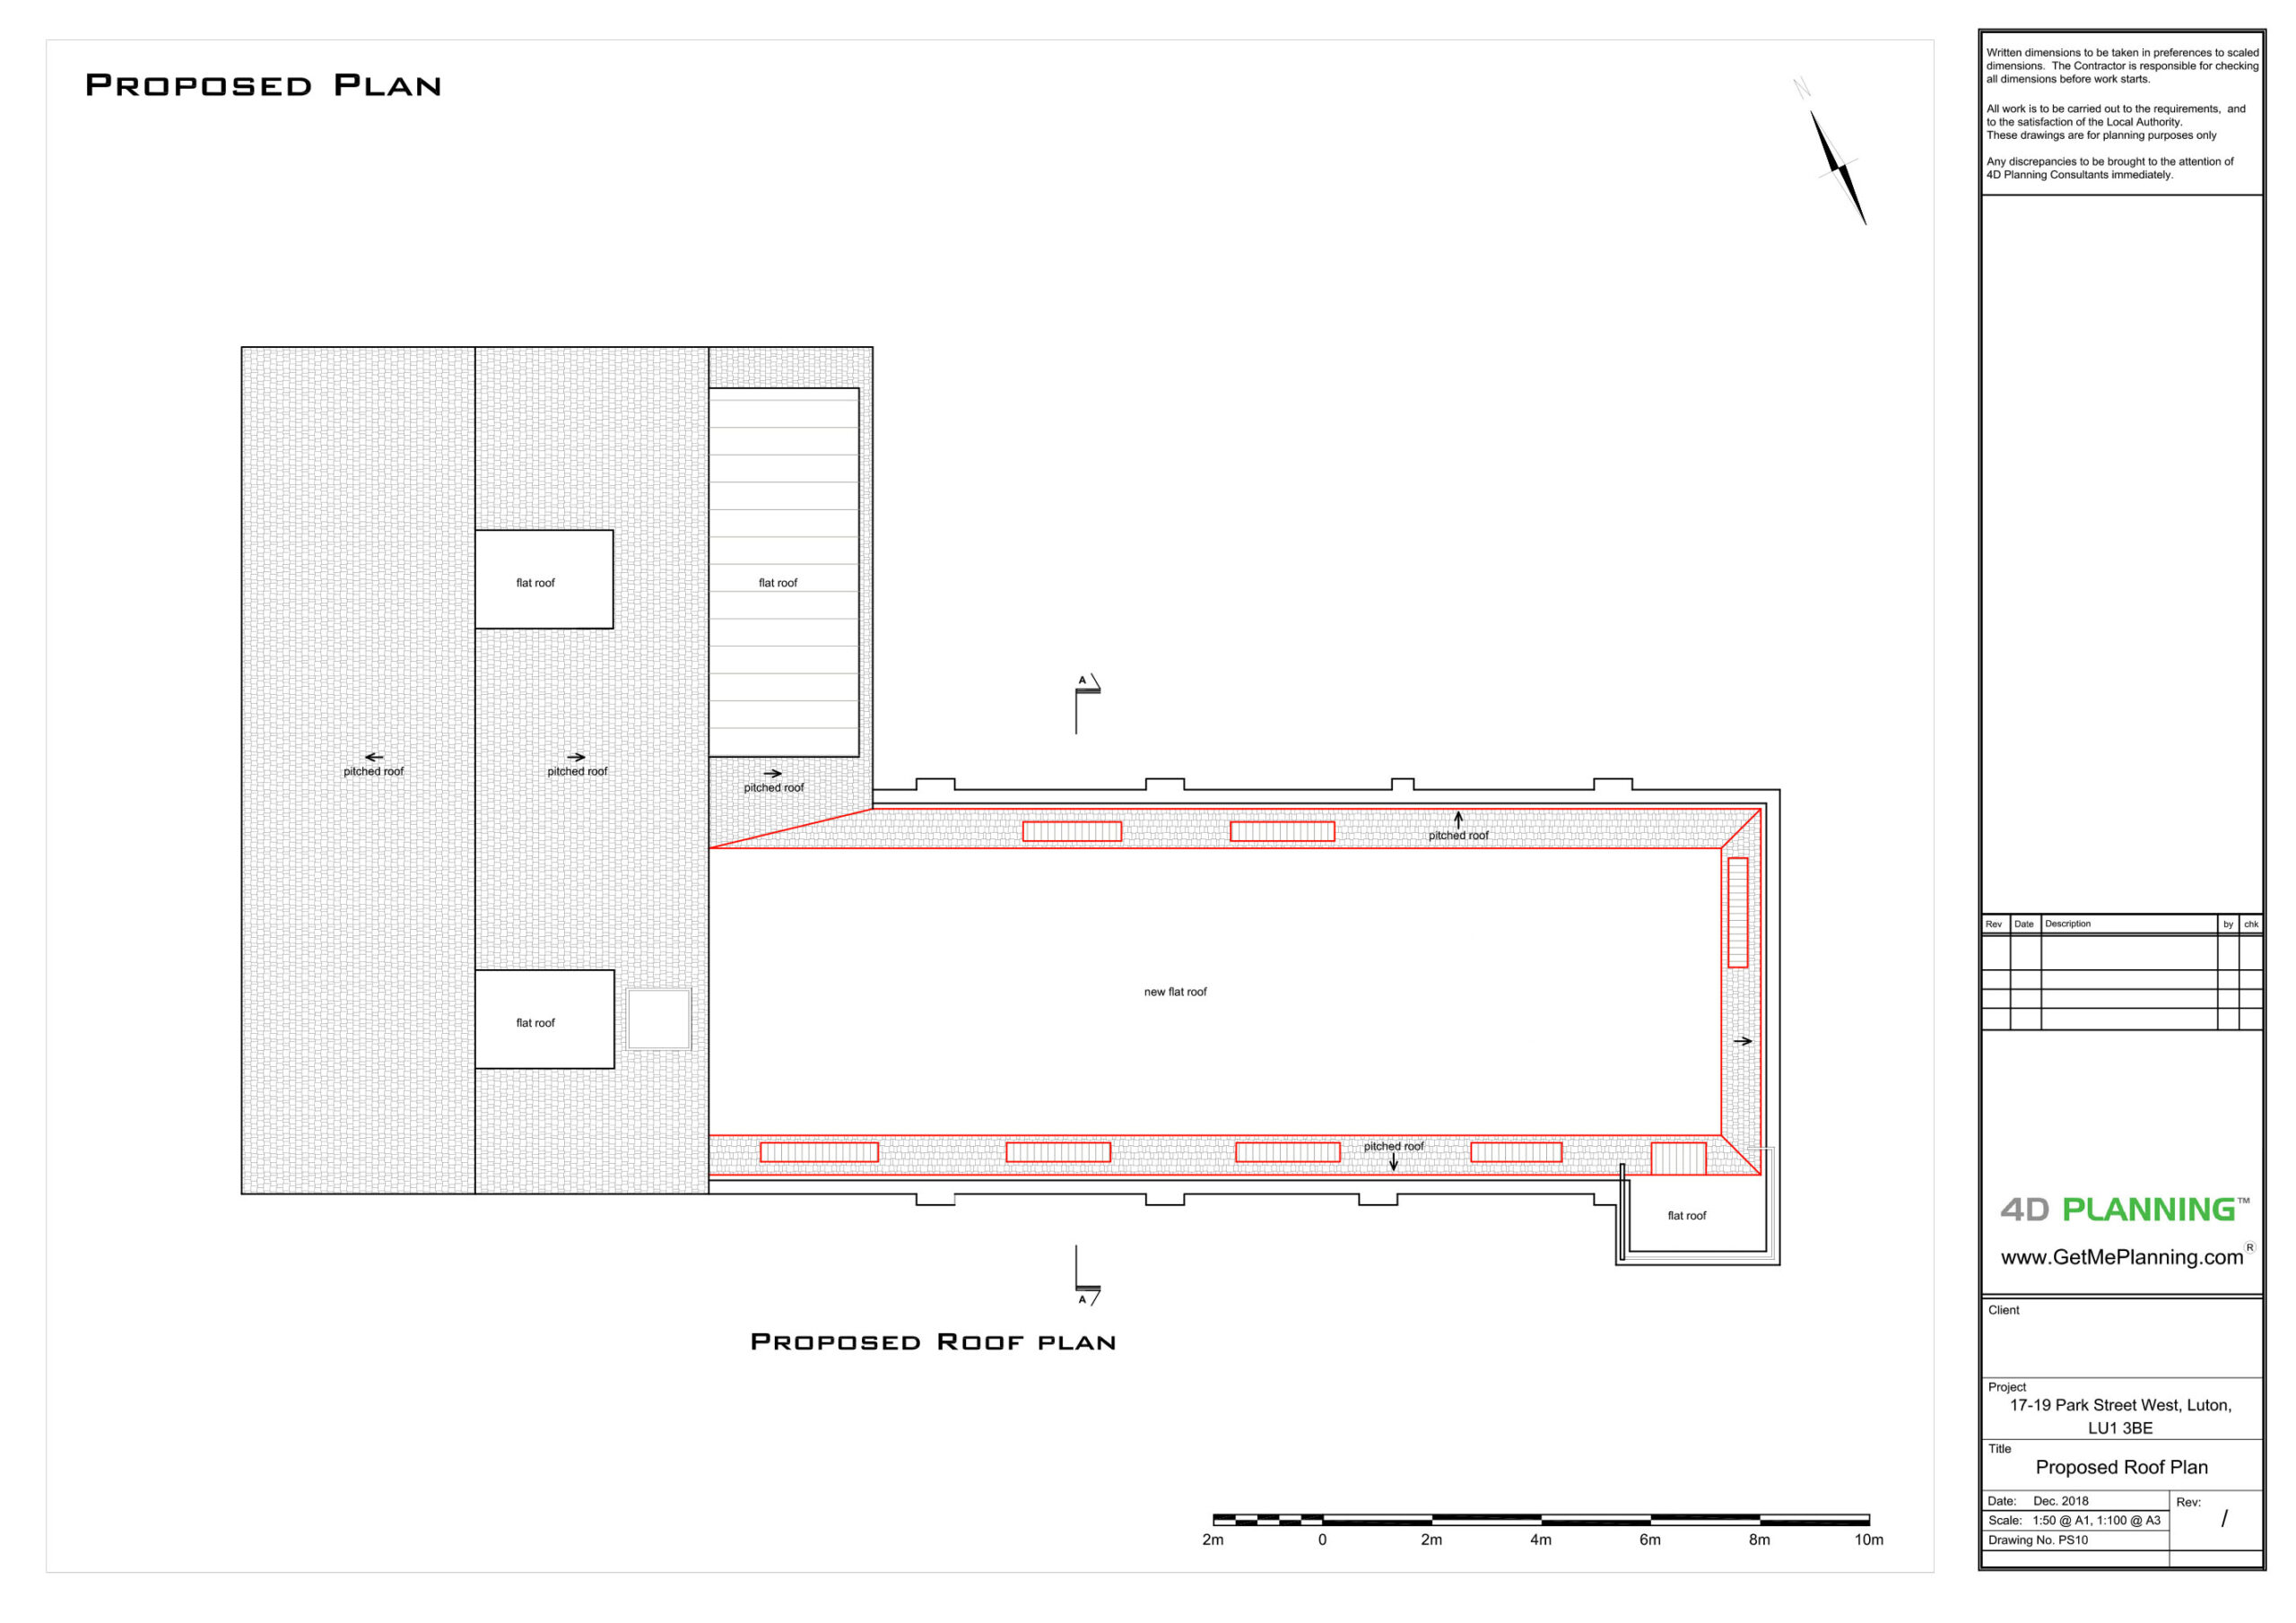 Roof-Plan-Planning-Permission-Granted-Two-Storey-Extension-New-Residential-Units-2